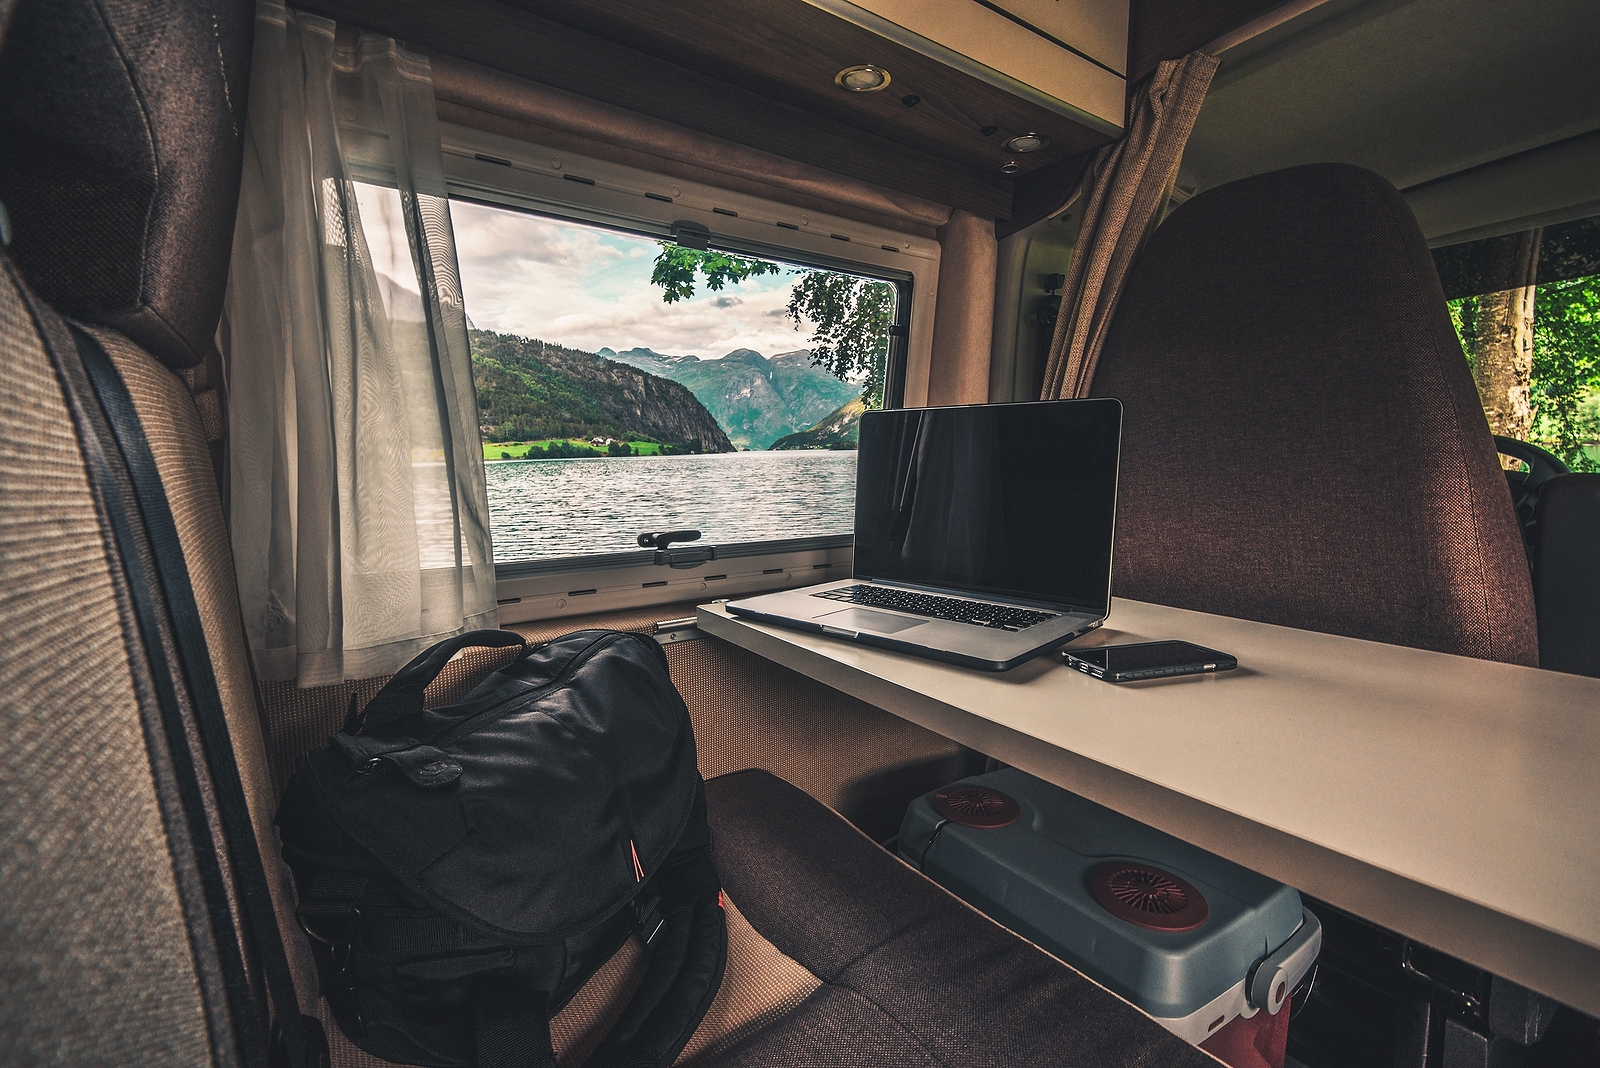 Work and Travel Concept. Laptop Computer on the Motorhome Table. Working While Traveling. Internet Connection While RVing.